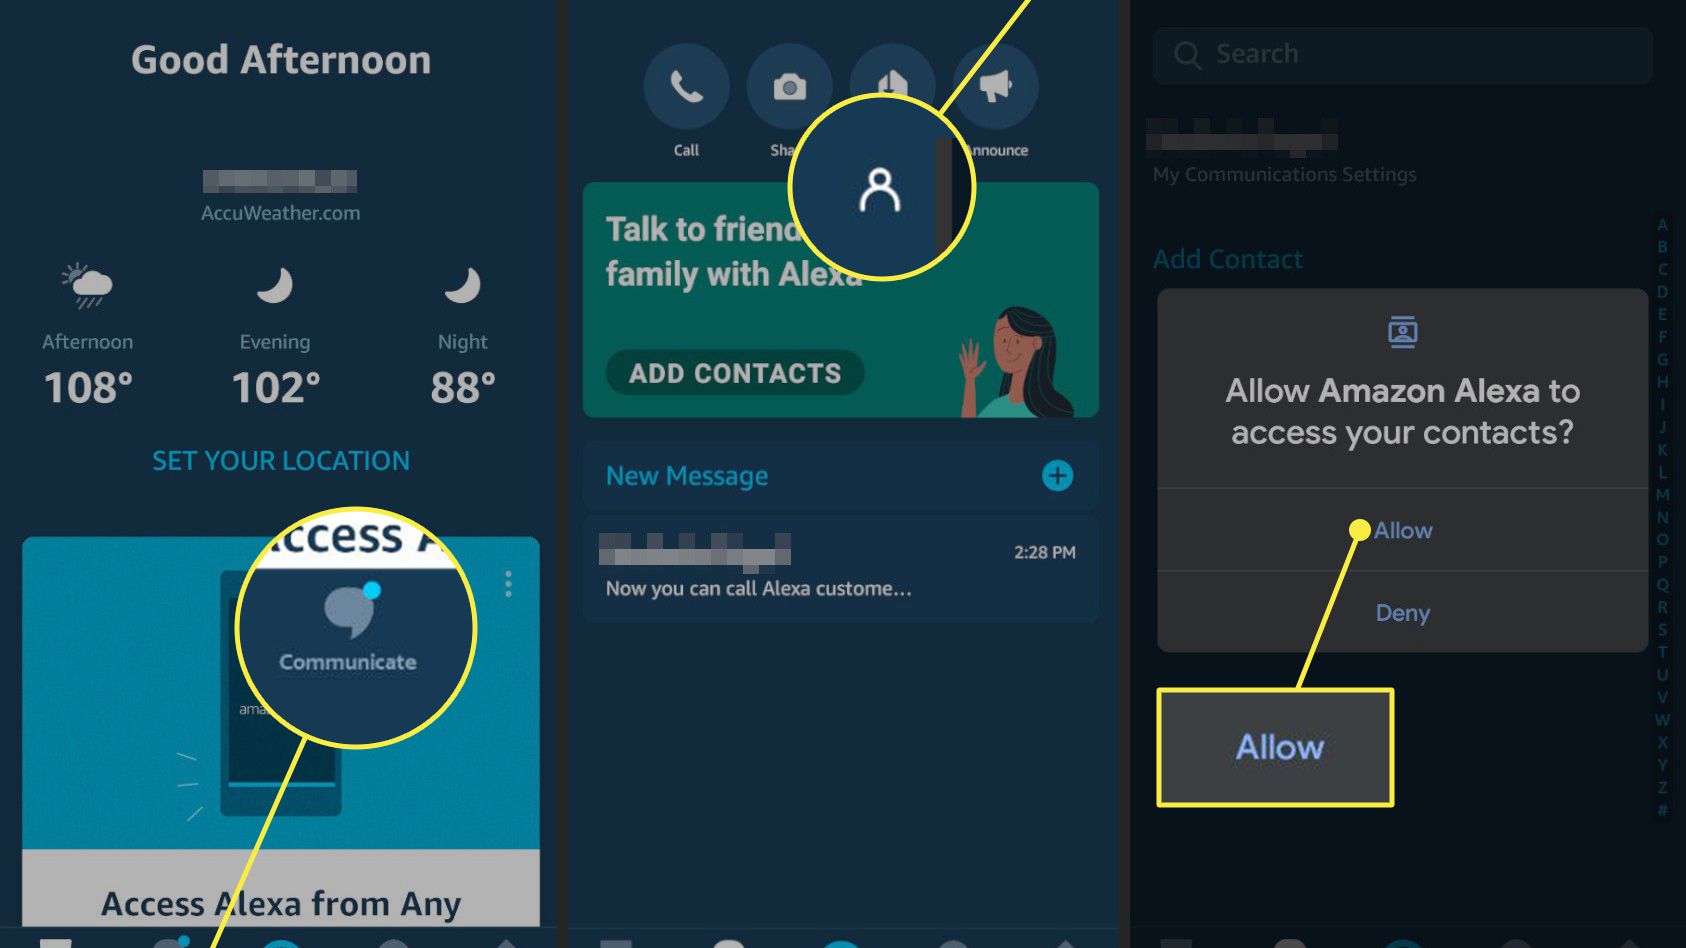 How to Block and Unblock Contacts in Alexa